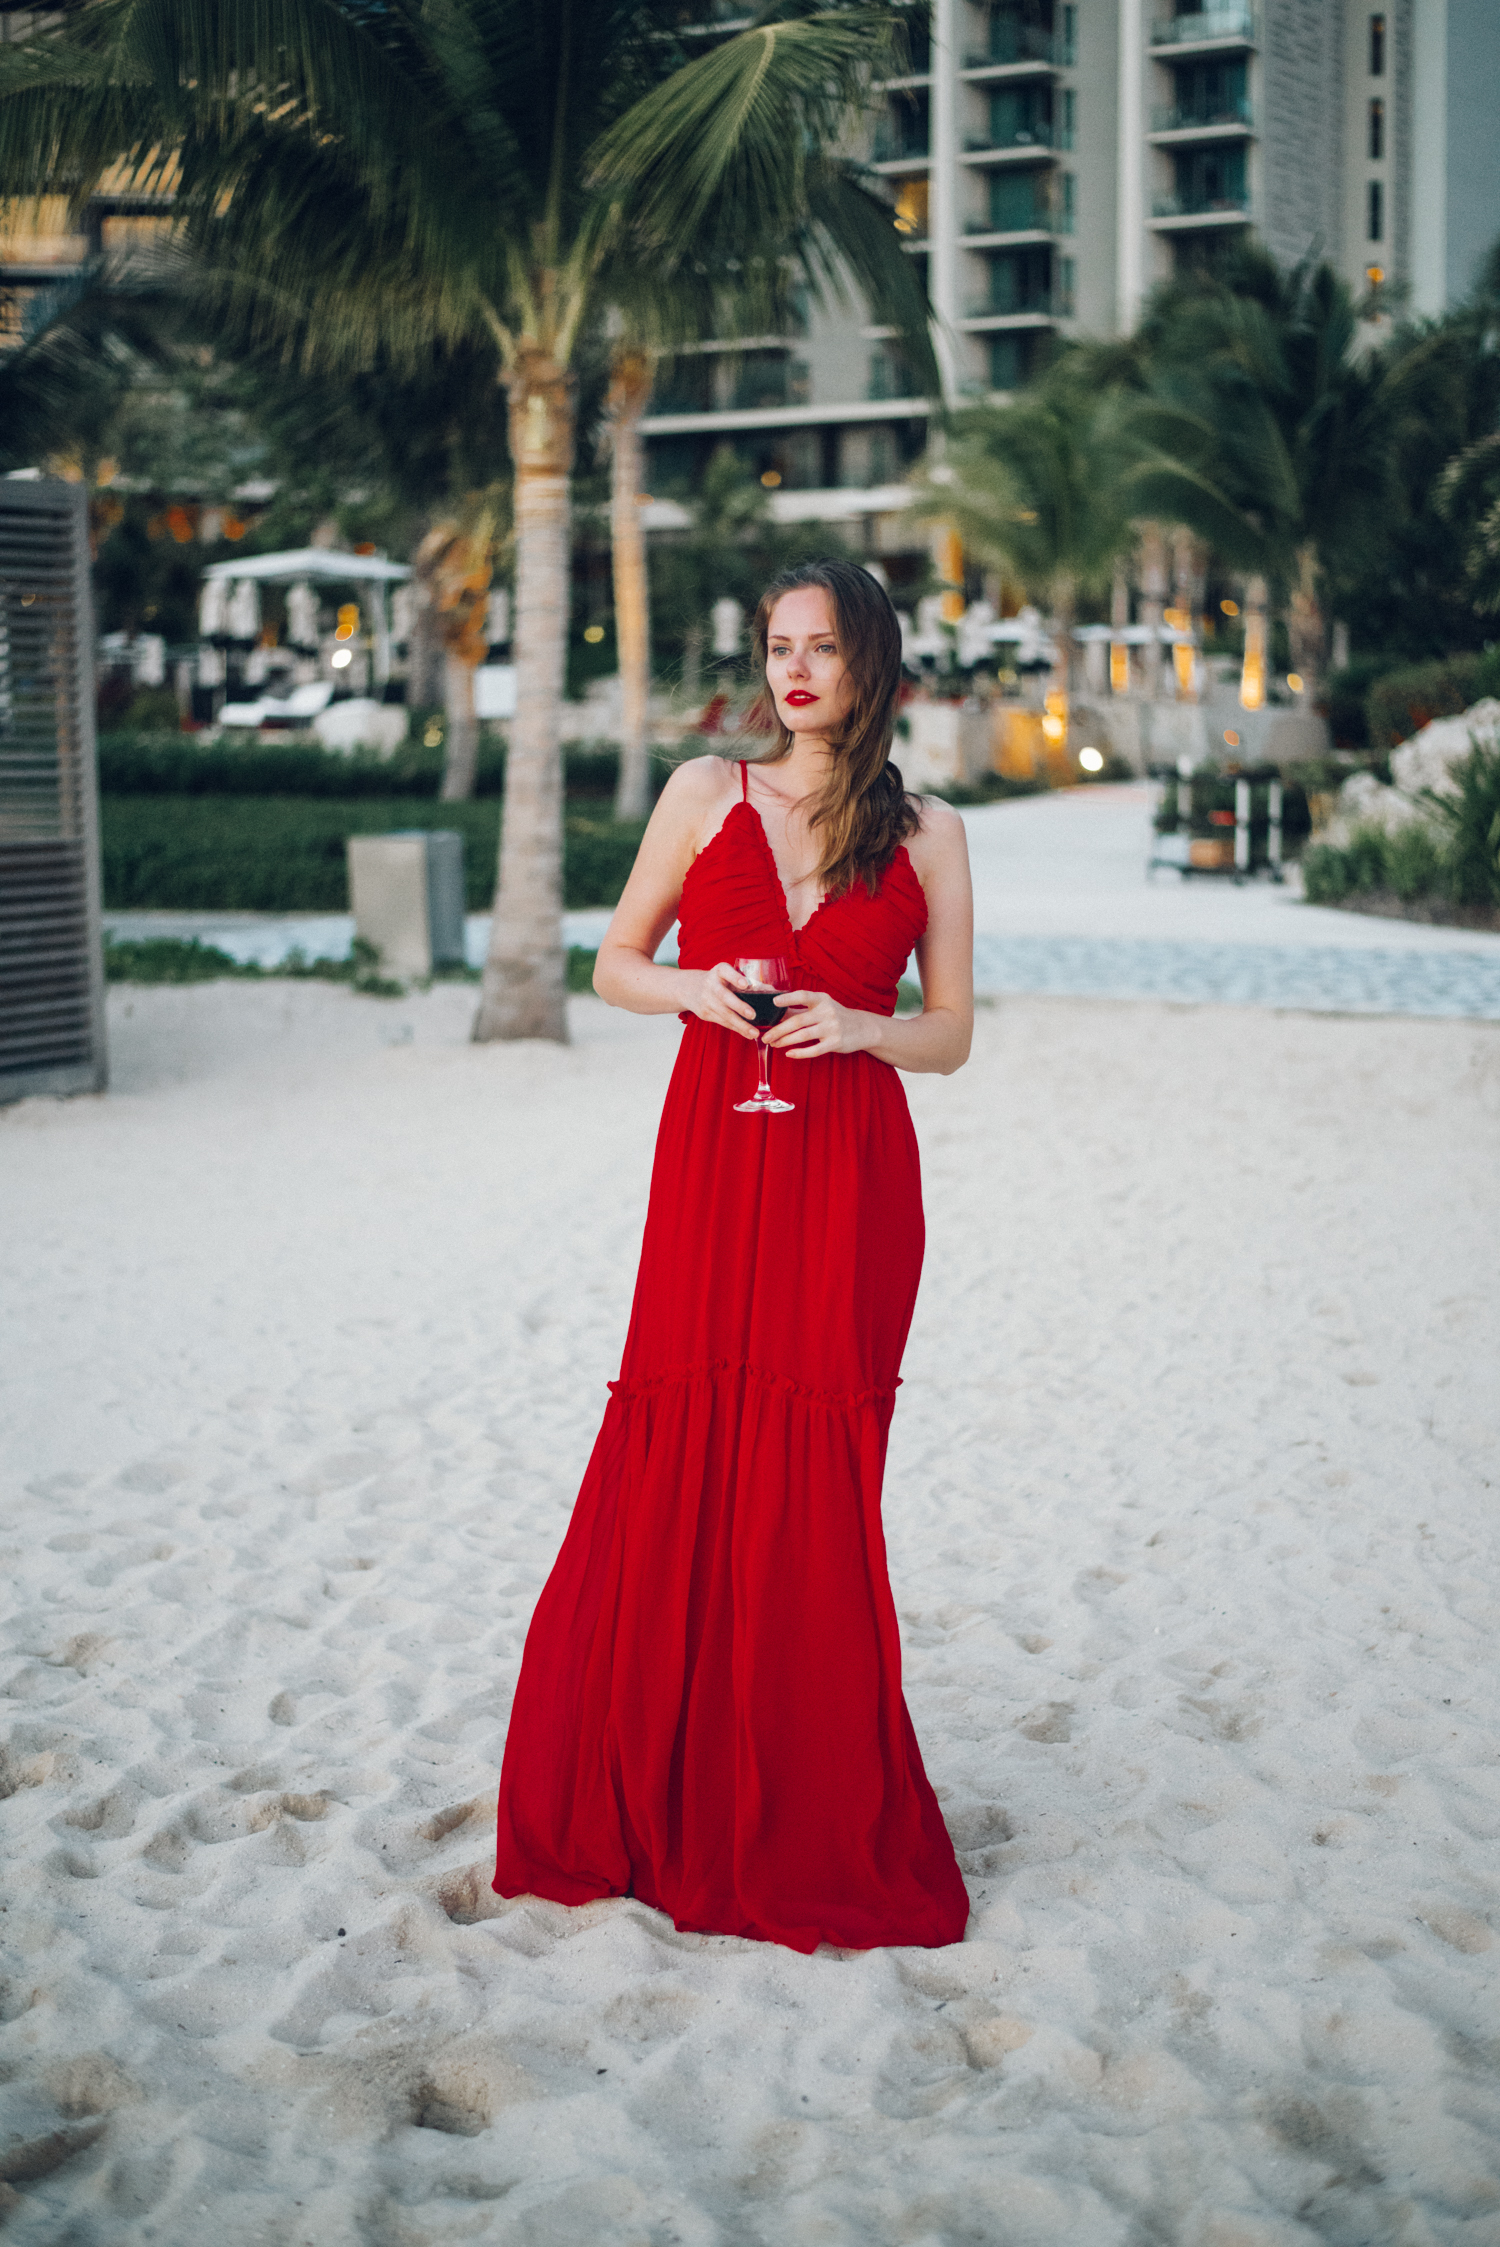 Alyssa Campanella of The A List blog shares her travels of 2018